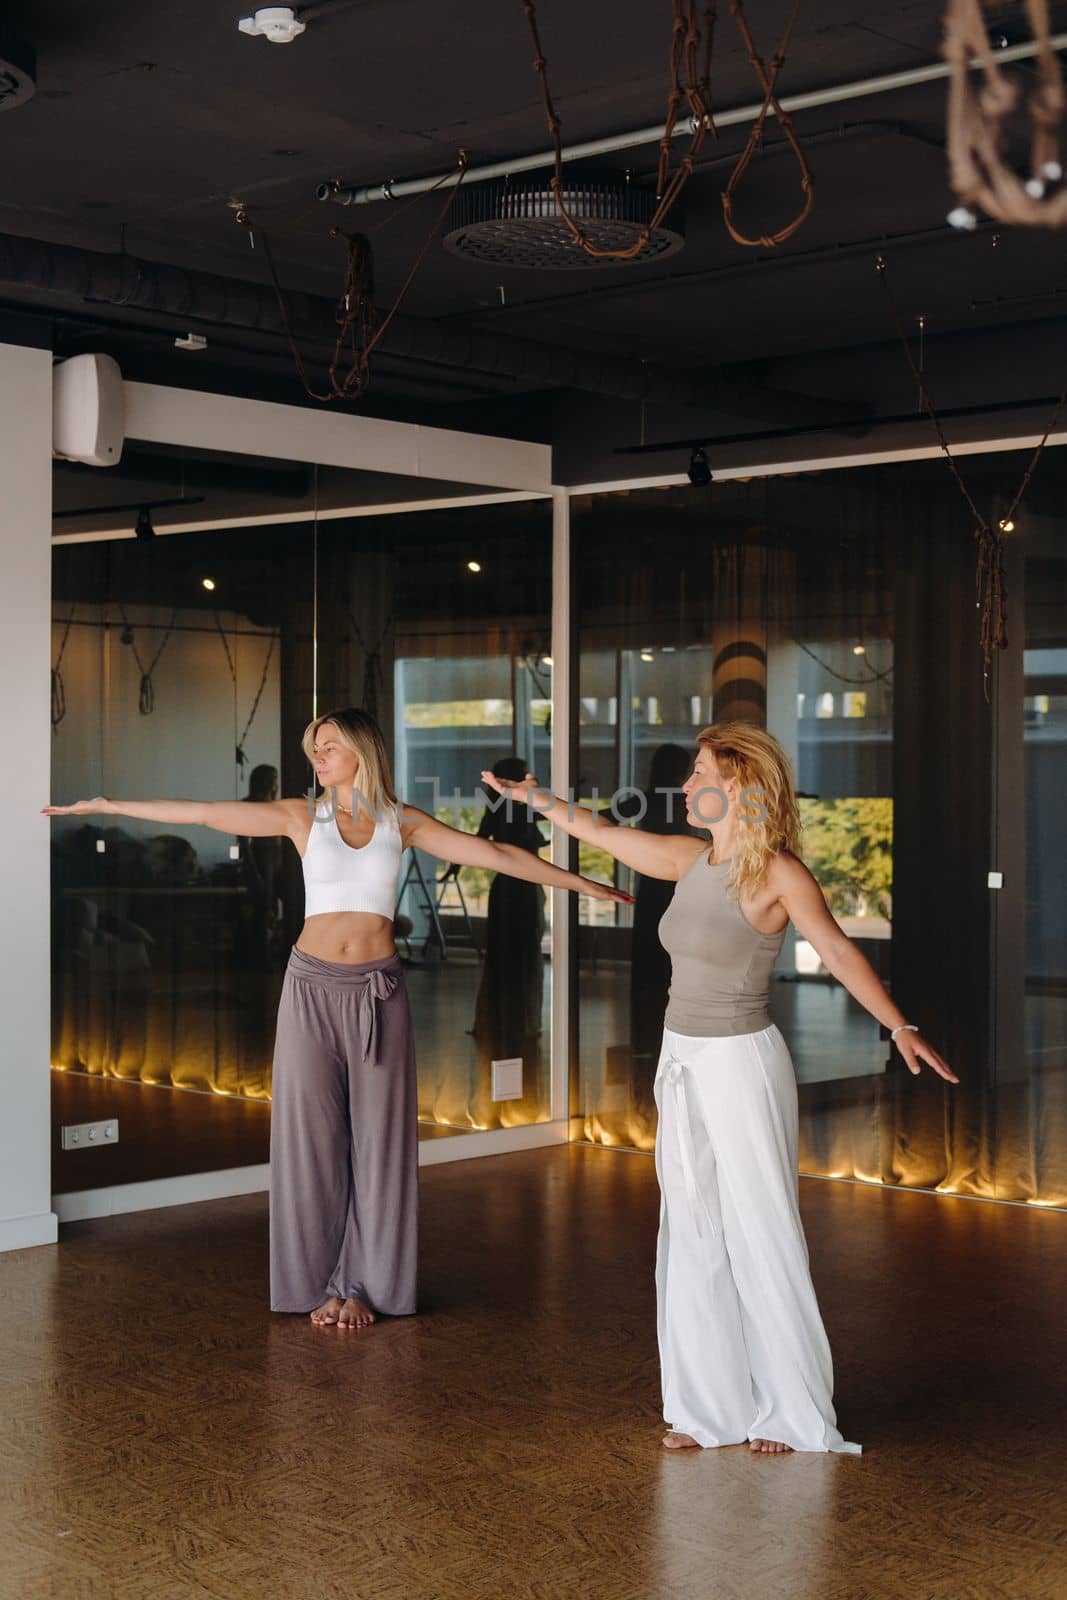 Two women in sportswear are doing dance yoga in the gym.